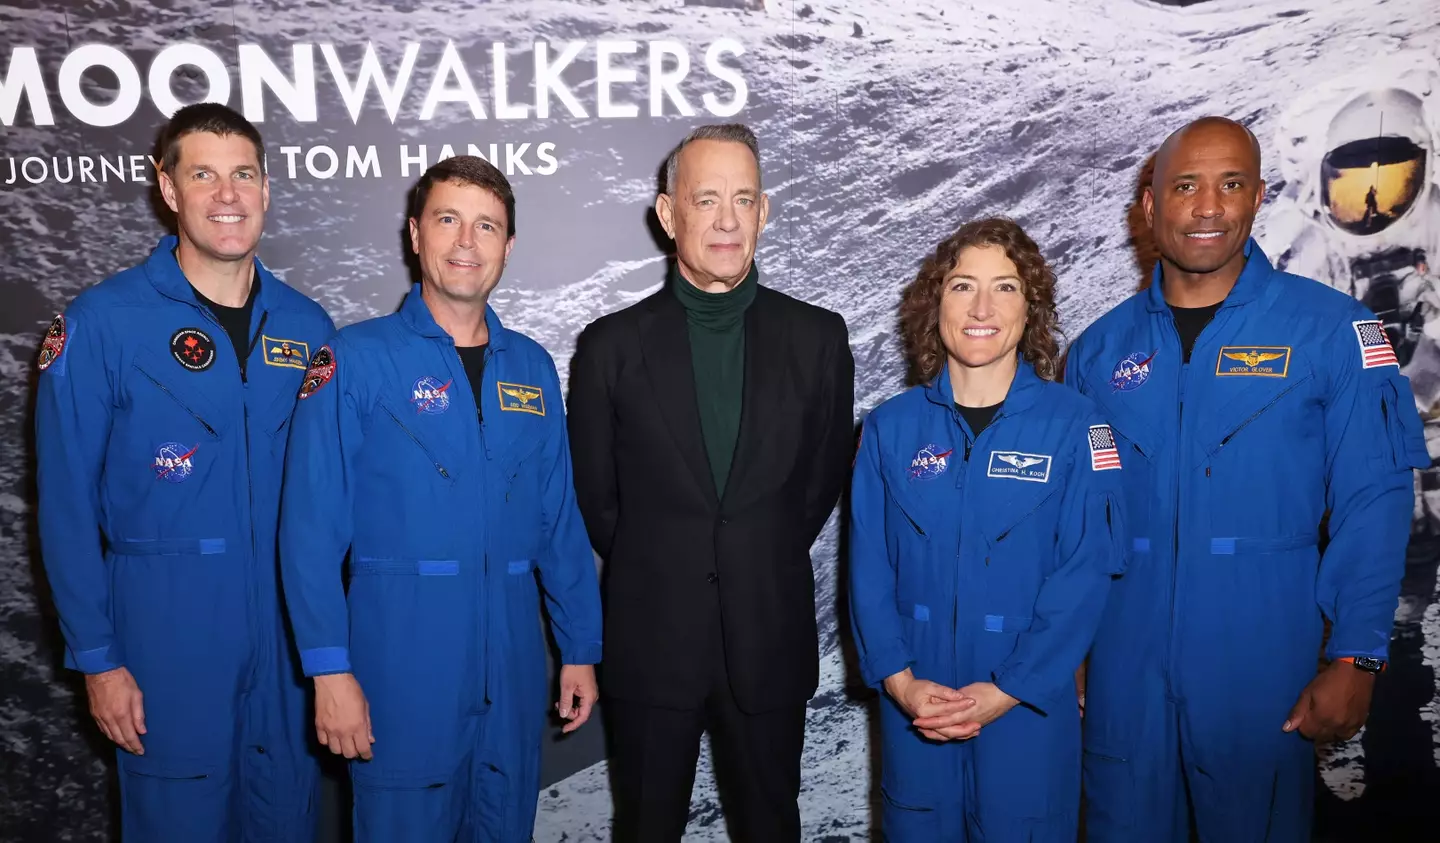 Hanks was joined by the Artemis 2 crew, who are going to the moon next year.